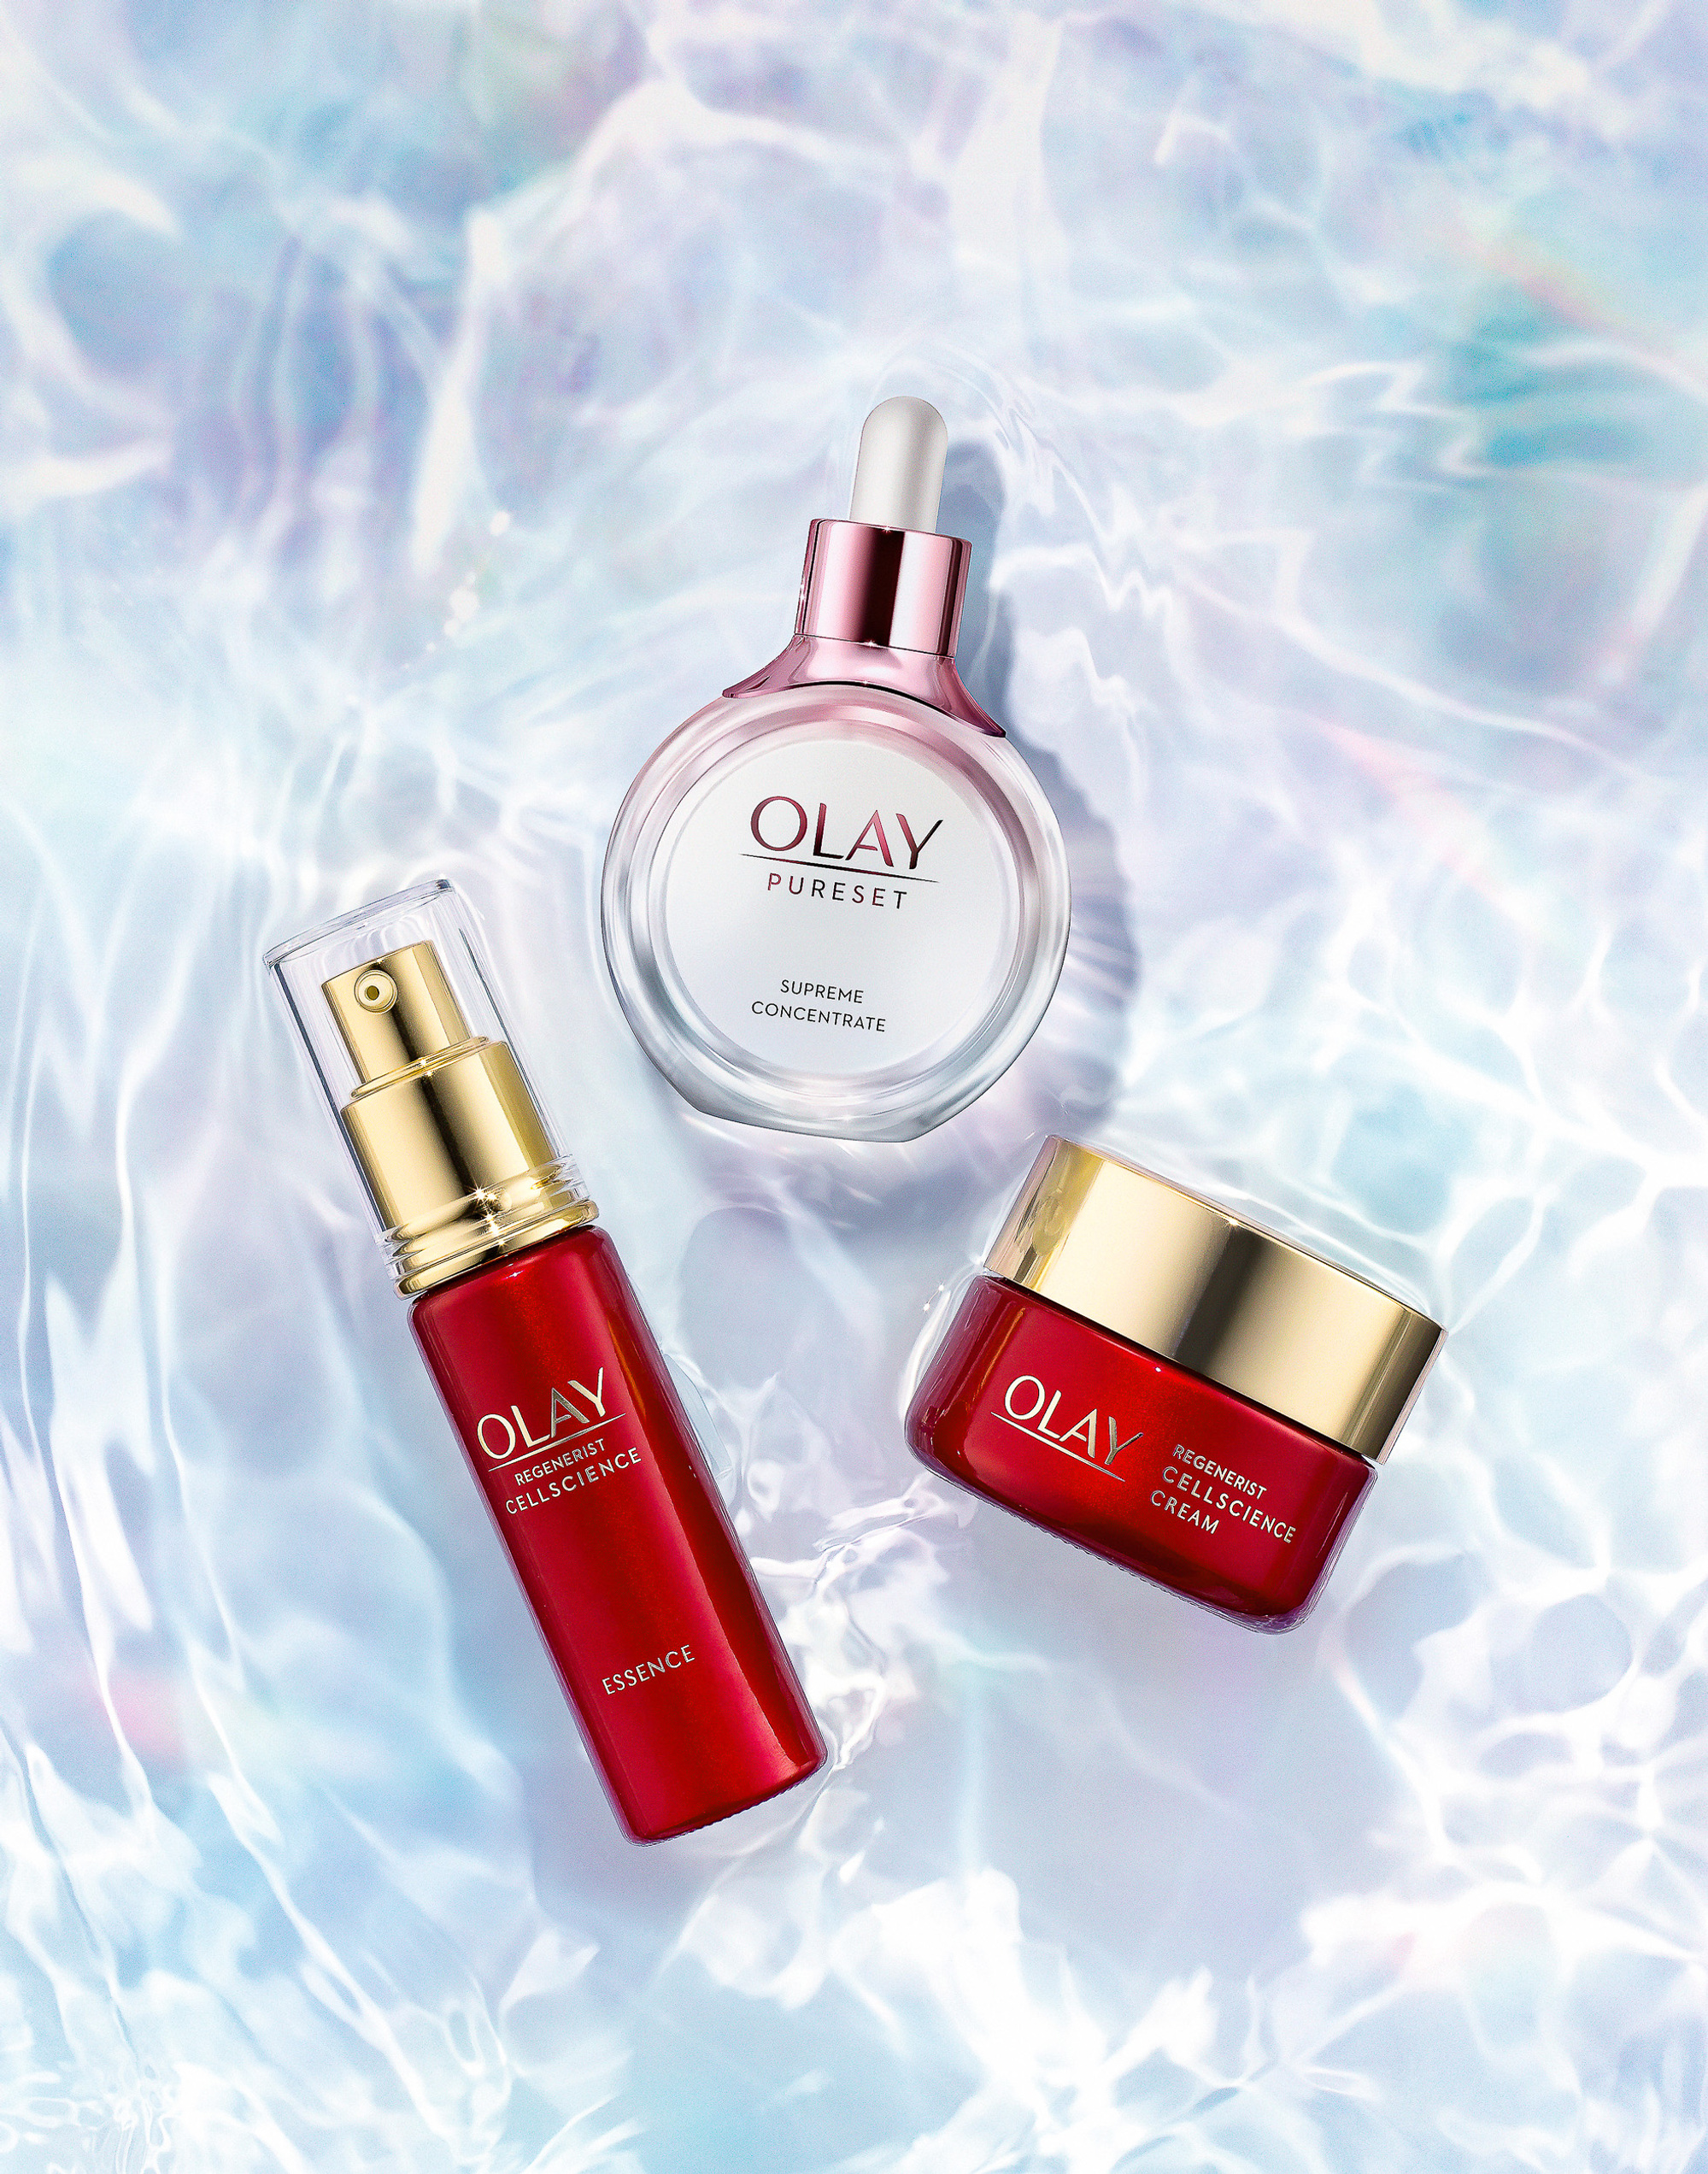 Olay cosmetics and beauty photography by commercial, product & advertising photographer Timothy Hogan in the Los Angeles Studio